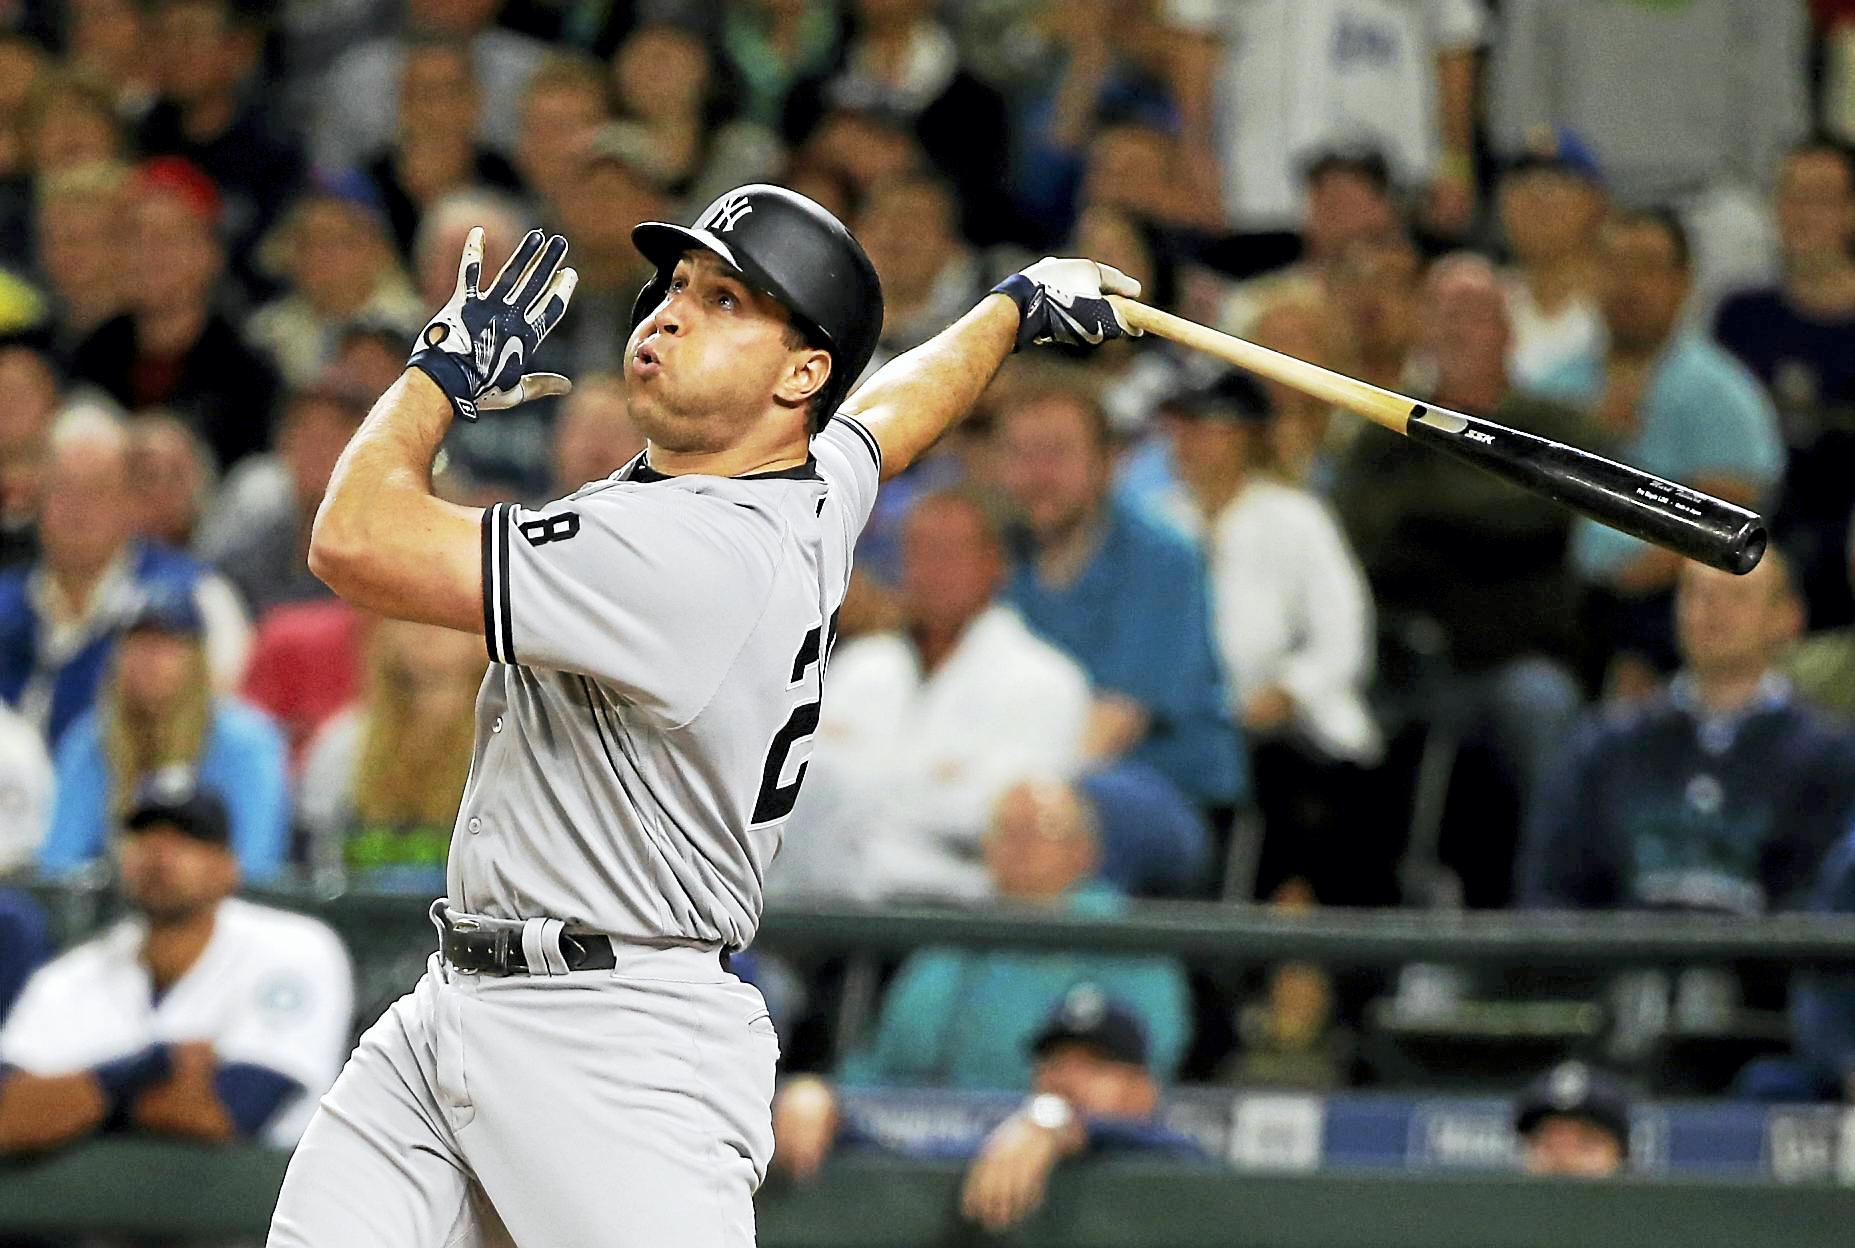 Yankees to hold ceremony for retiring Mark Teixeira